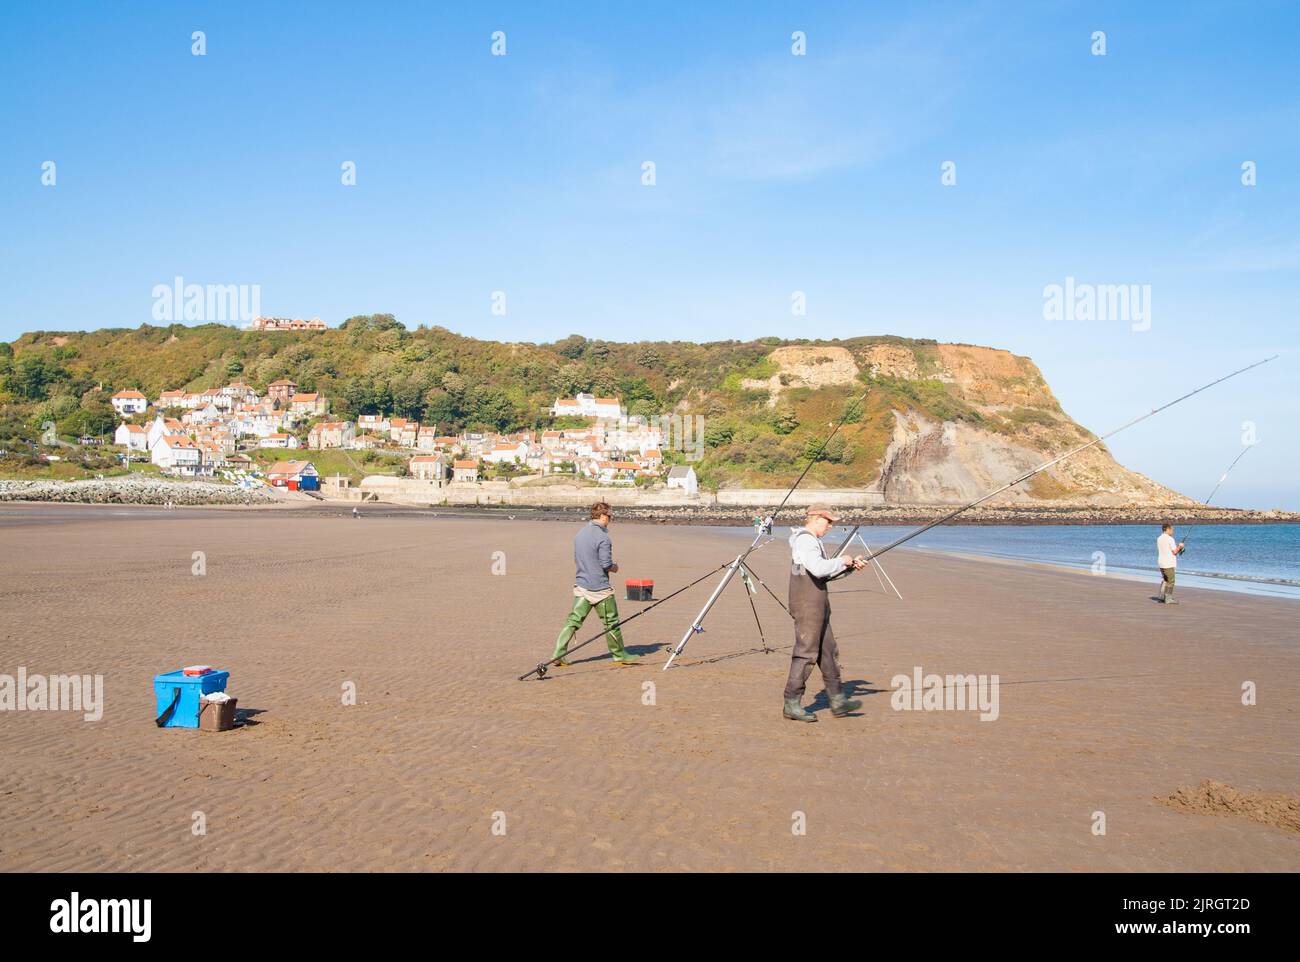 People fishing from Runswick bay beach with village in background. North Yorkshire, England, UK Stock Photo